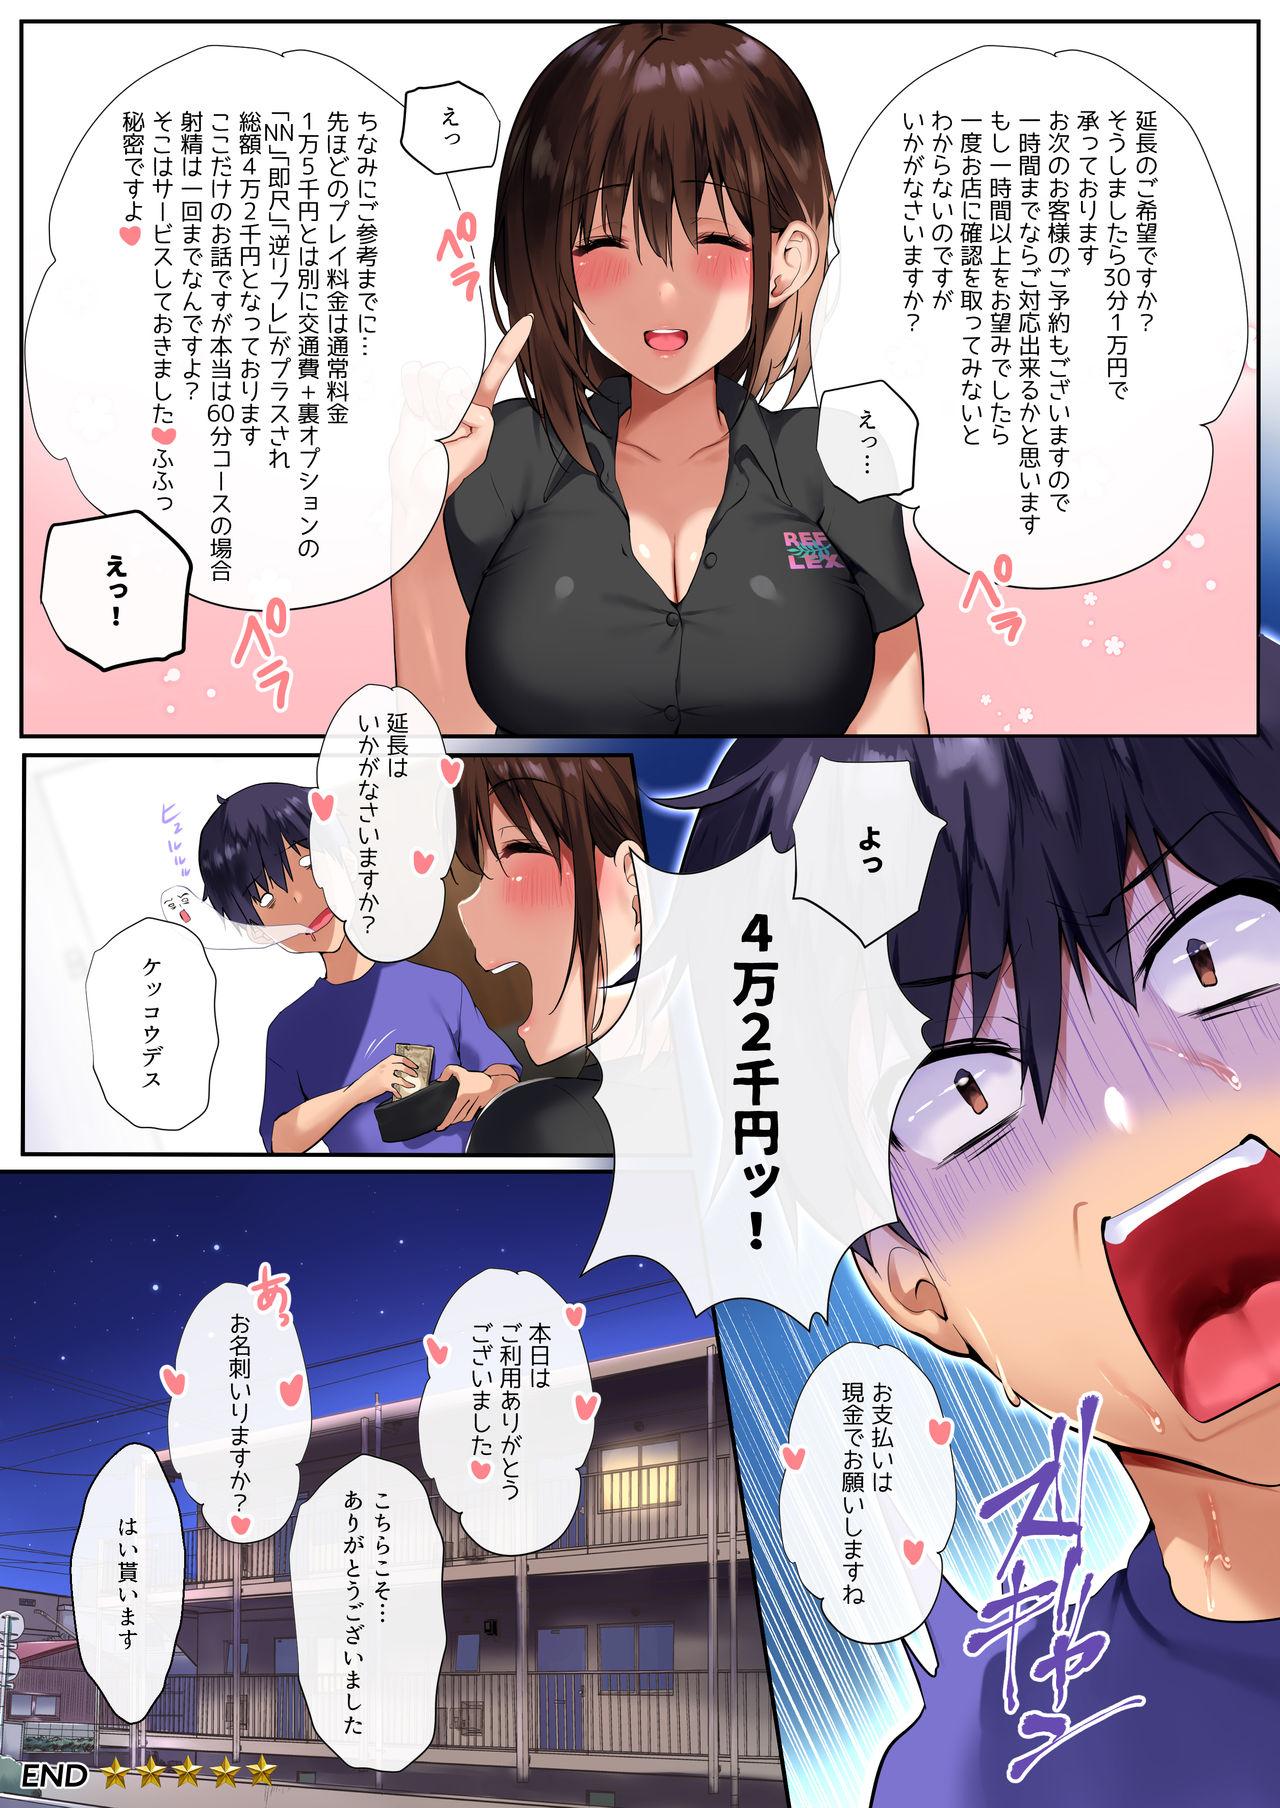 Doggy Style Onee-san Refle - Original Bj - Page 21